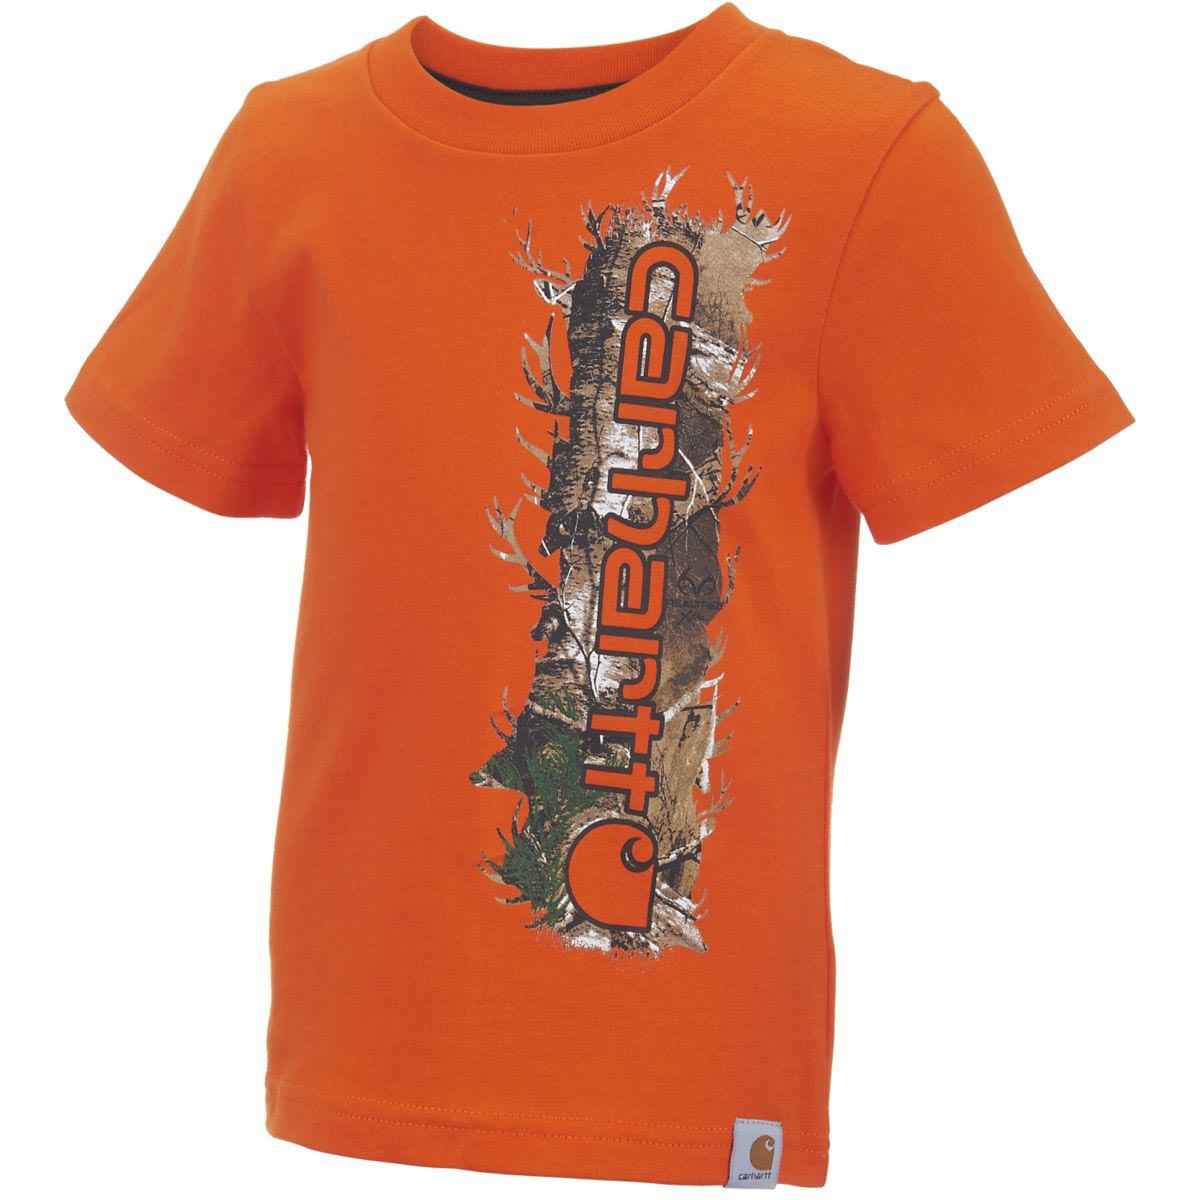 Carhartt Infant and Toddler Boys' Vertical Camo Tee